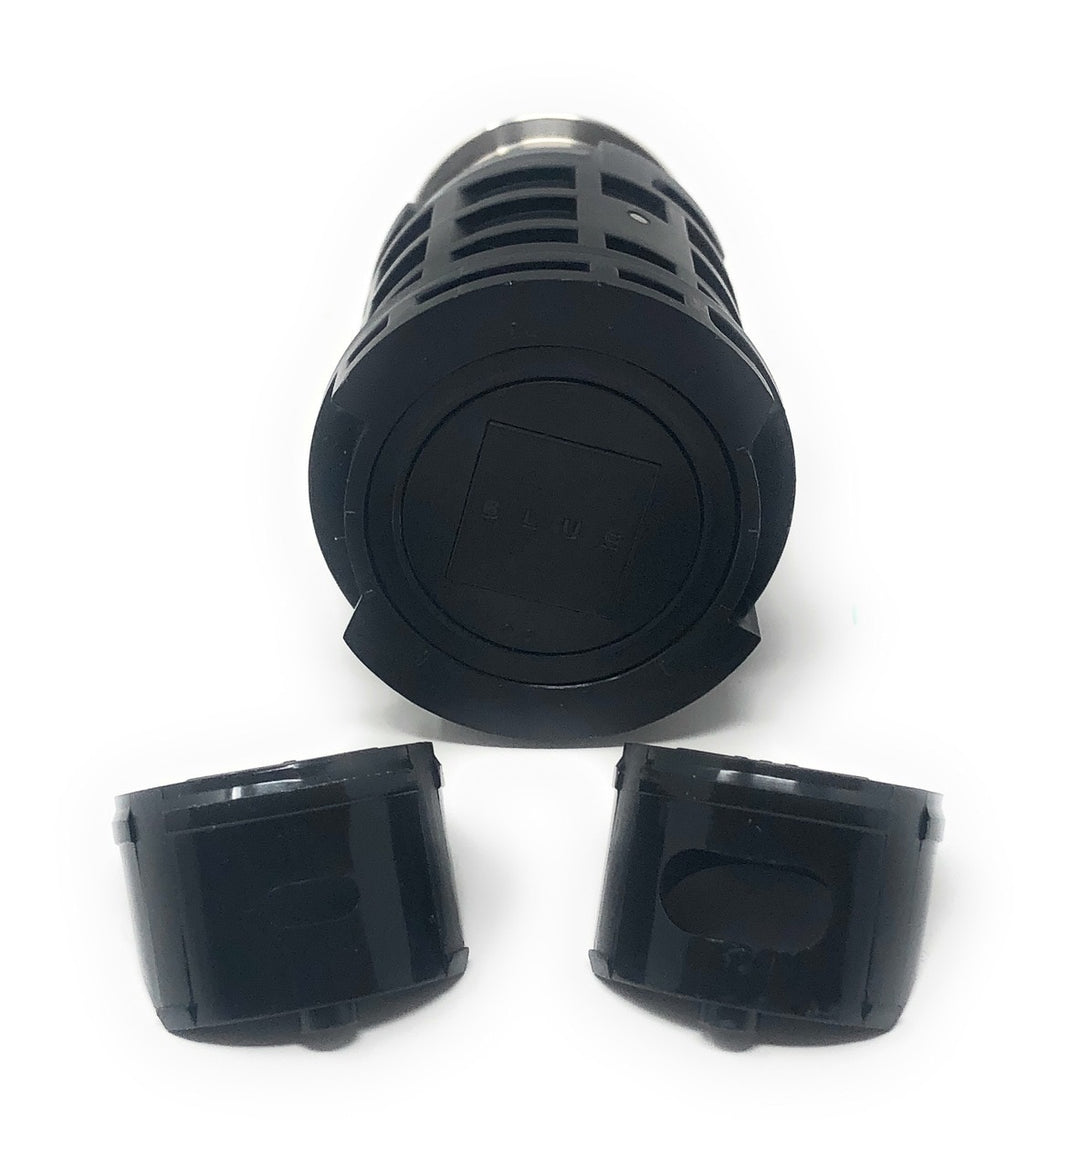 Blue Square Q360 Pop Up Head with Nozzles (Black) - Top View